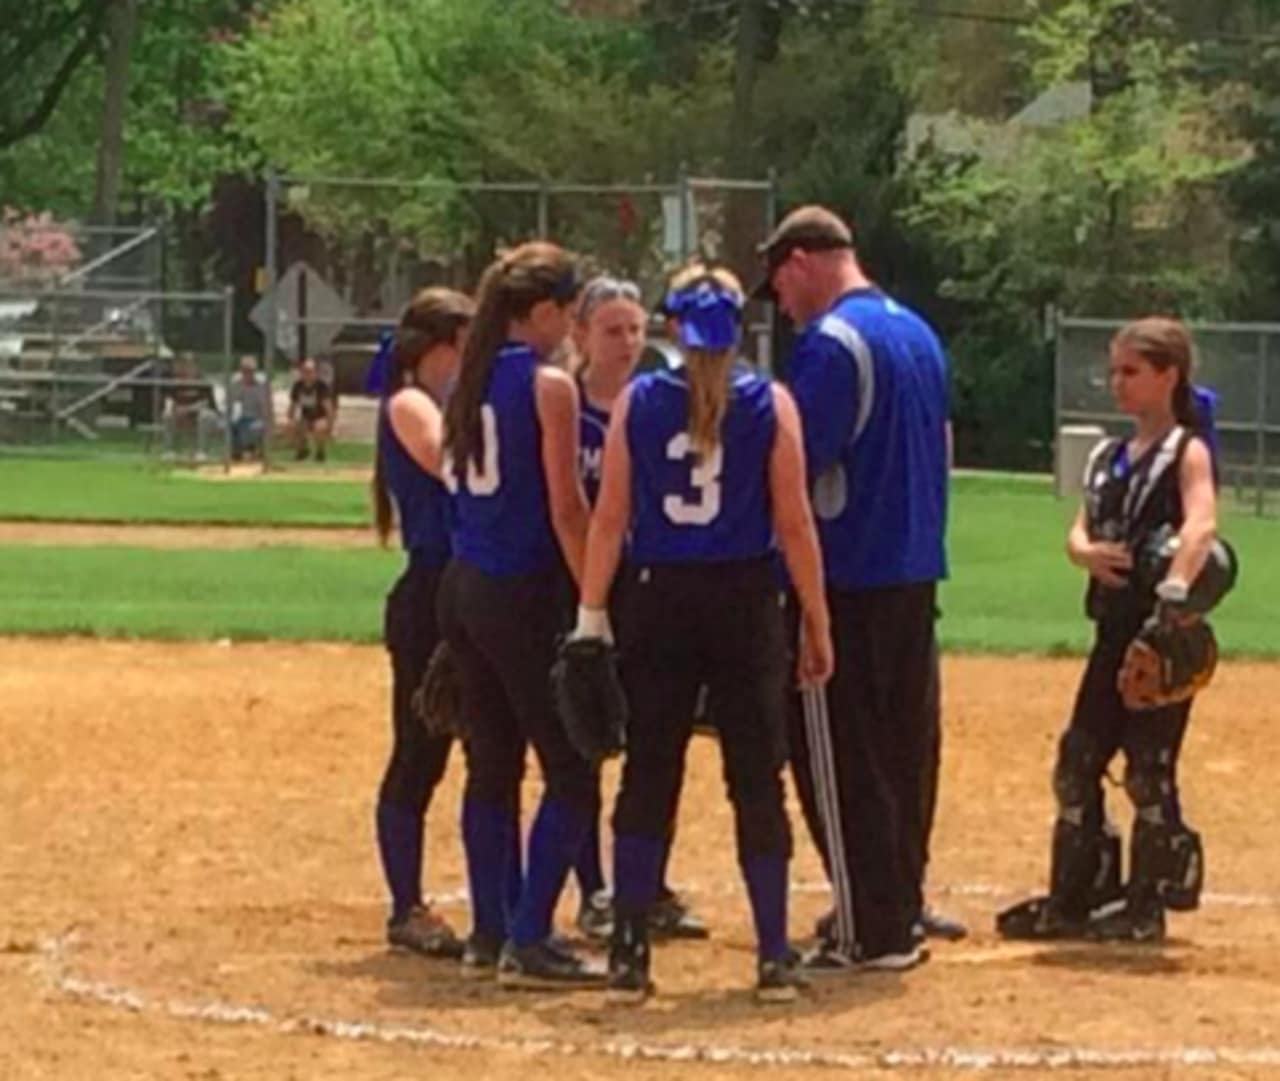 A "Parade of Champions" on Friday will honor the NVD girls softball team, in part.